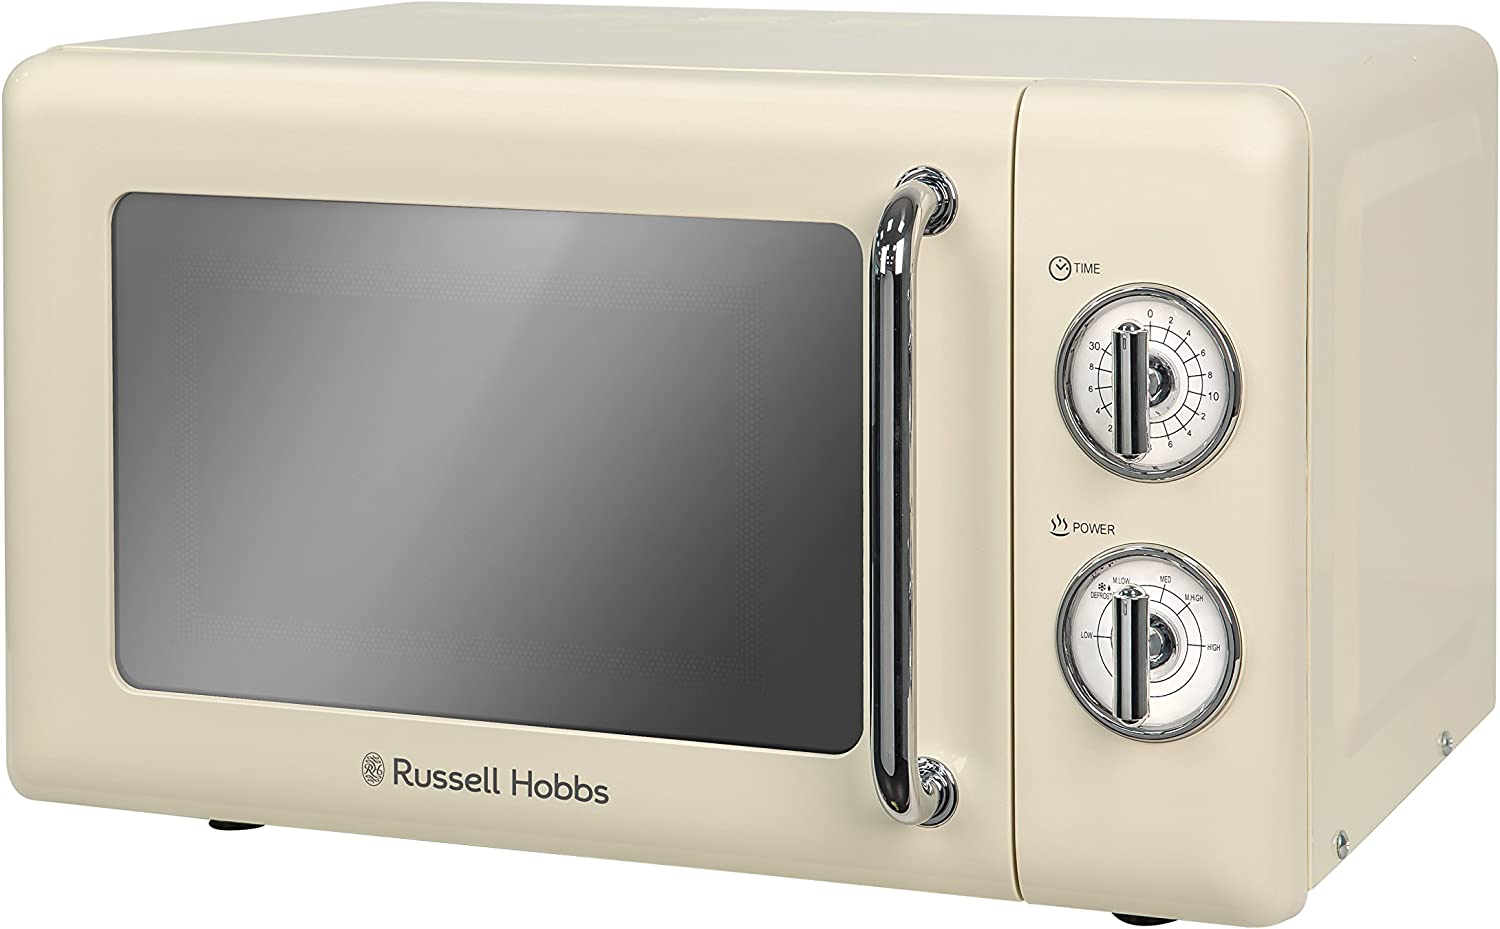 Russell Hobbs Rhretmm705c 17l 700W Creme Compact Retro Solo Manual Microwave with 5 Power Levels, Timer, Defrost Setting, Easy Cleaning